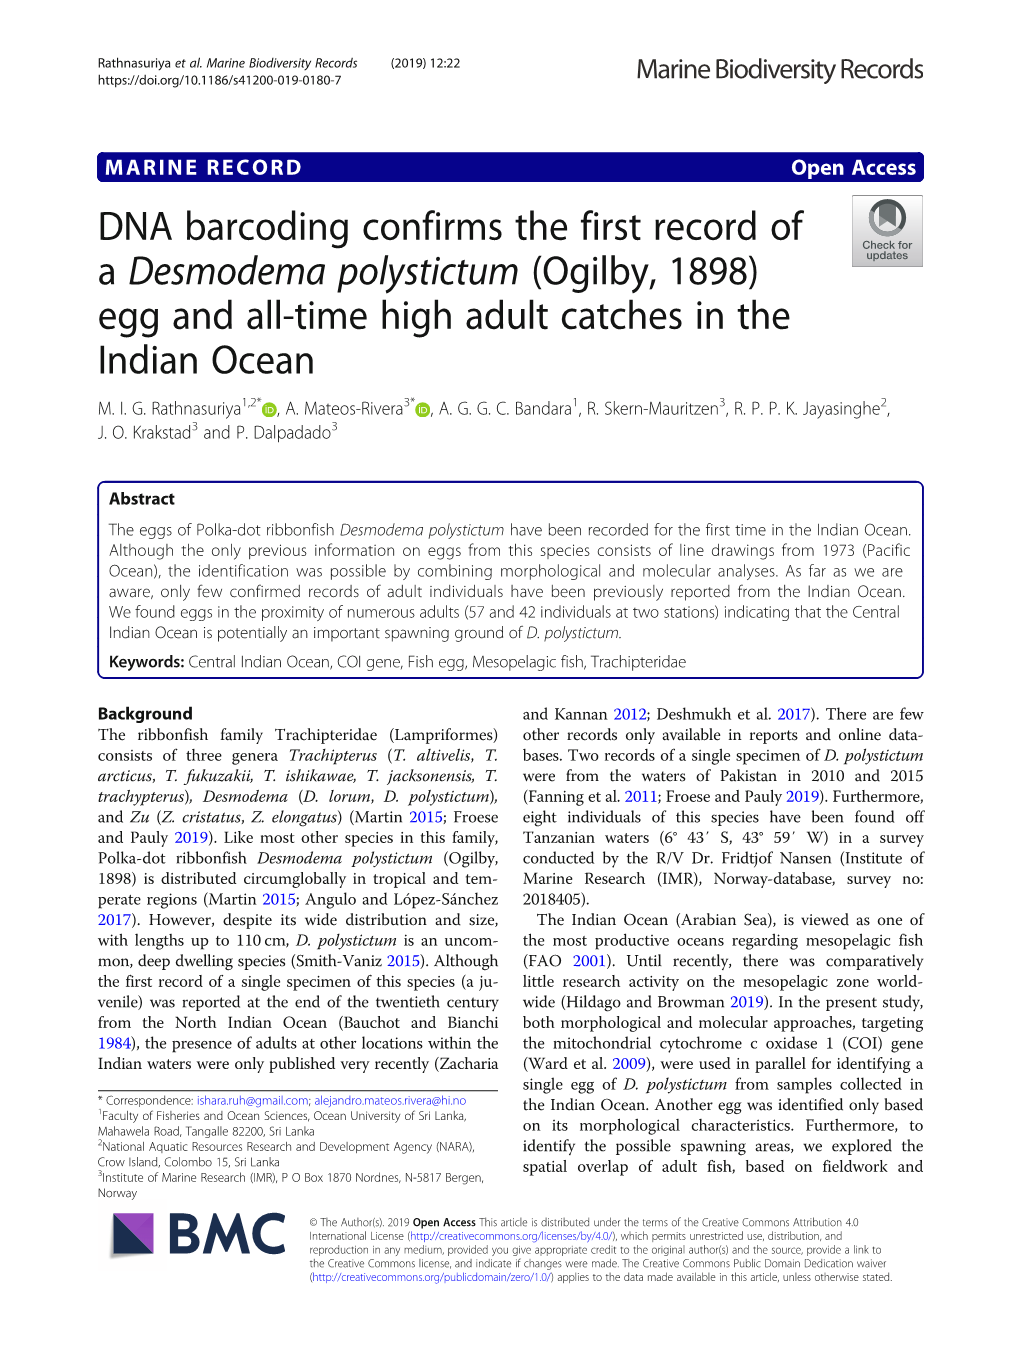 DNA Barcoding Confirms the First Record of a Desmodema Polystictum (Ogilby, 1898) Egg and All-Time High Adult Catches in the Indian Ocean M